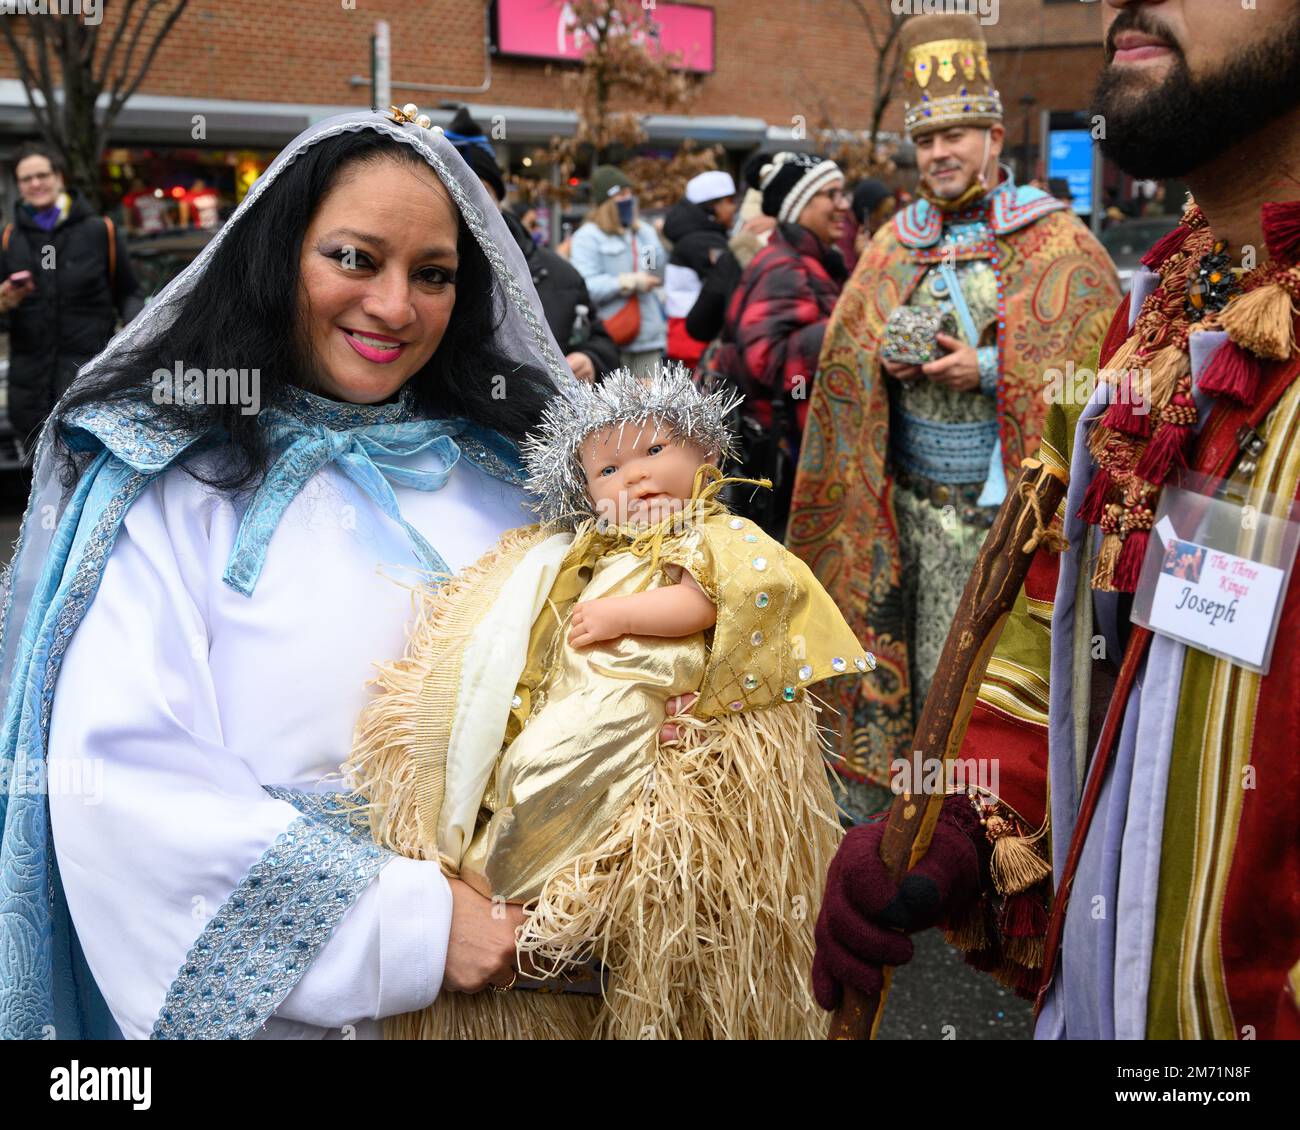 New York, USA. 6th Jan, 2023. Participants dressed up as the Virgin Mary carrying baby Jesus next to Joseph and in front of Balthasar the Wise Man march through the streets in East Harlem during the 46th annual Three Kings Day Parade organized by El Museo del Bario. The traditional Spanish celebration was held in person for the first time since the start of the coronavirus (COVID-19) pandemic. The theme for this year was: 'Entre Familia: Mental Health & Wellness of our Communities' focusing on the importance of mental health and wellness. Credit: Enrique Shore/Alamy Live News Stock Photo